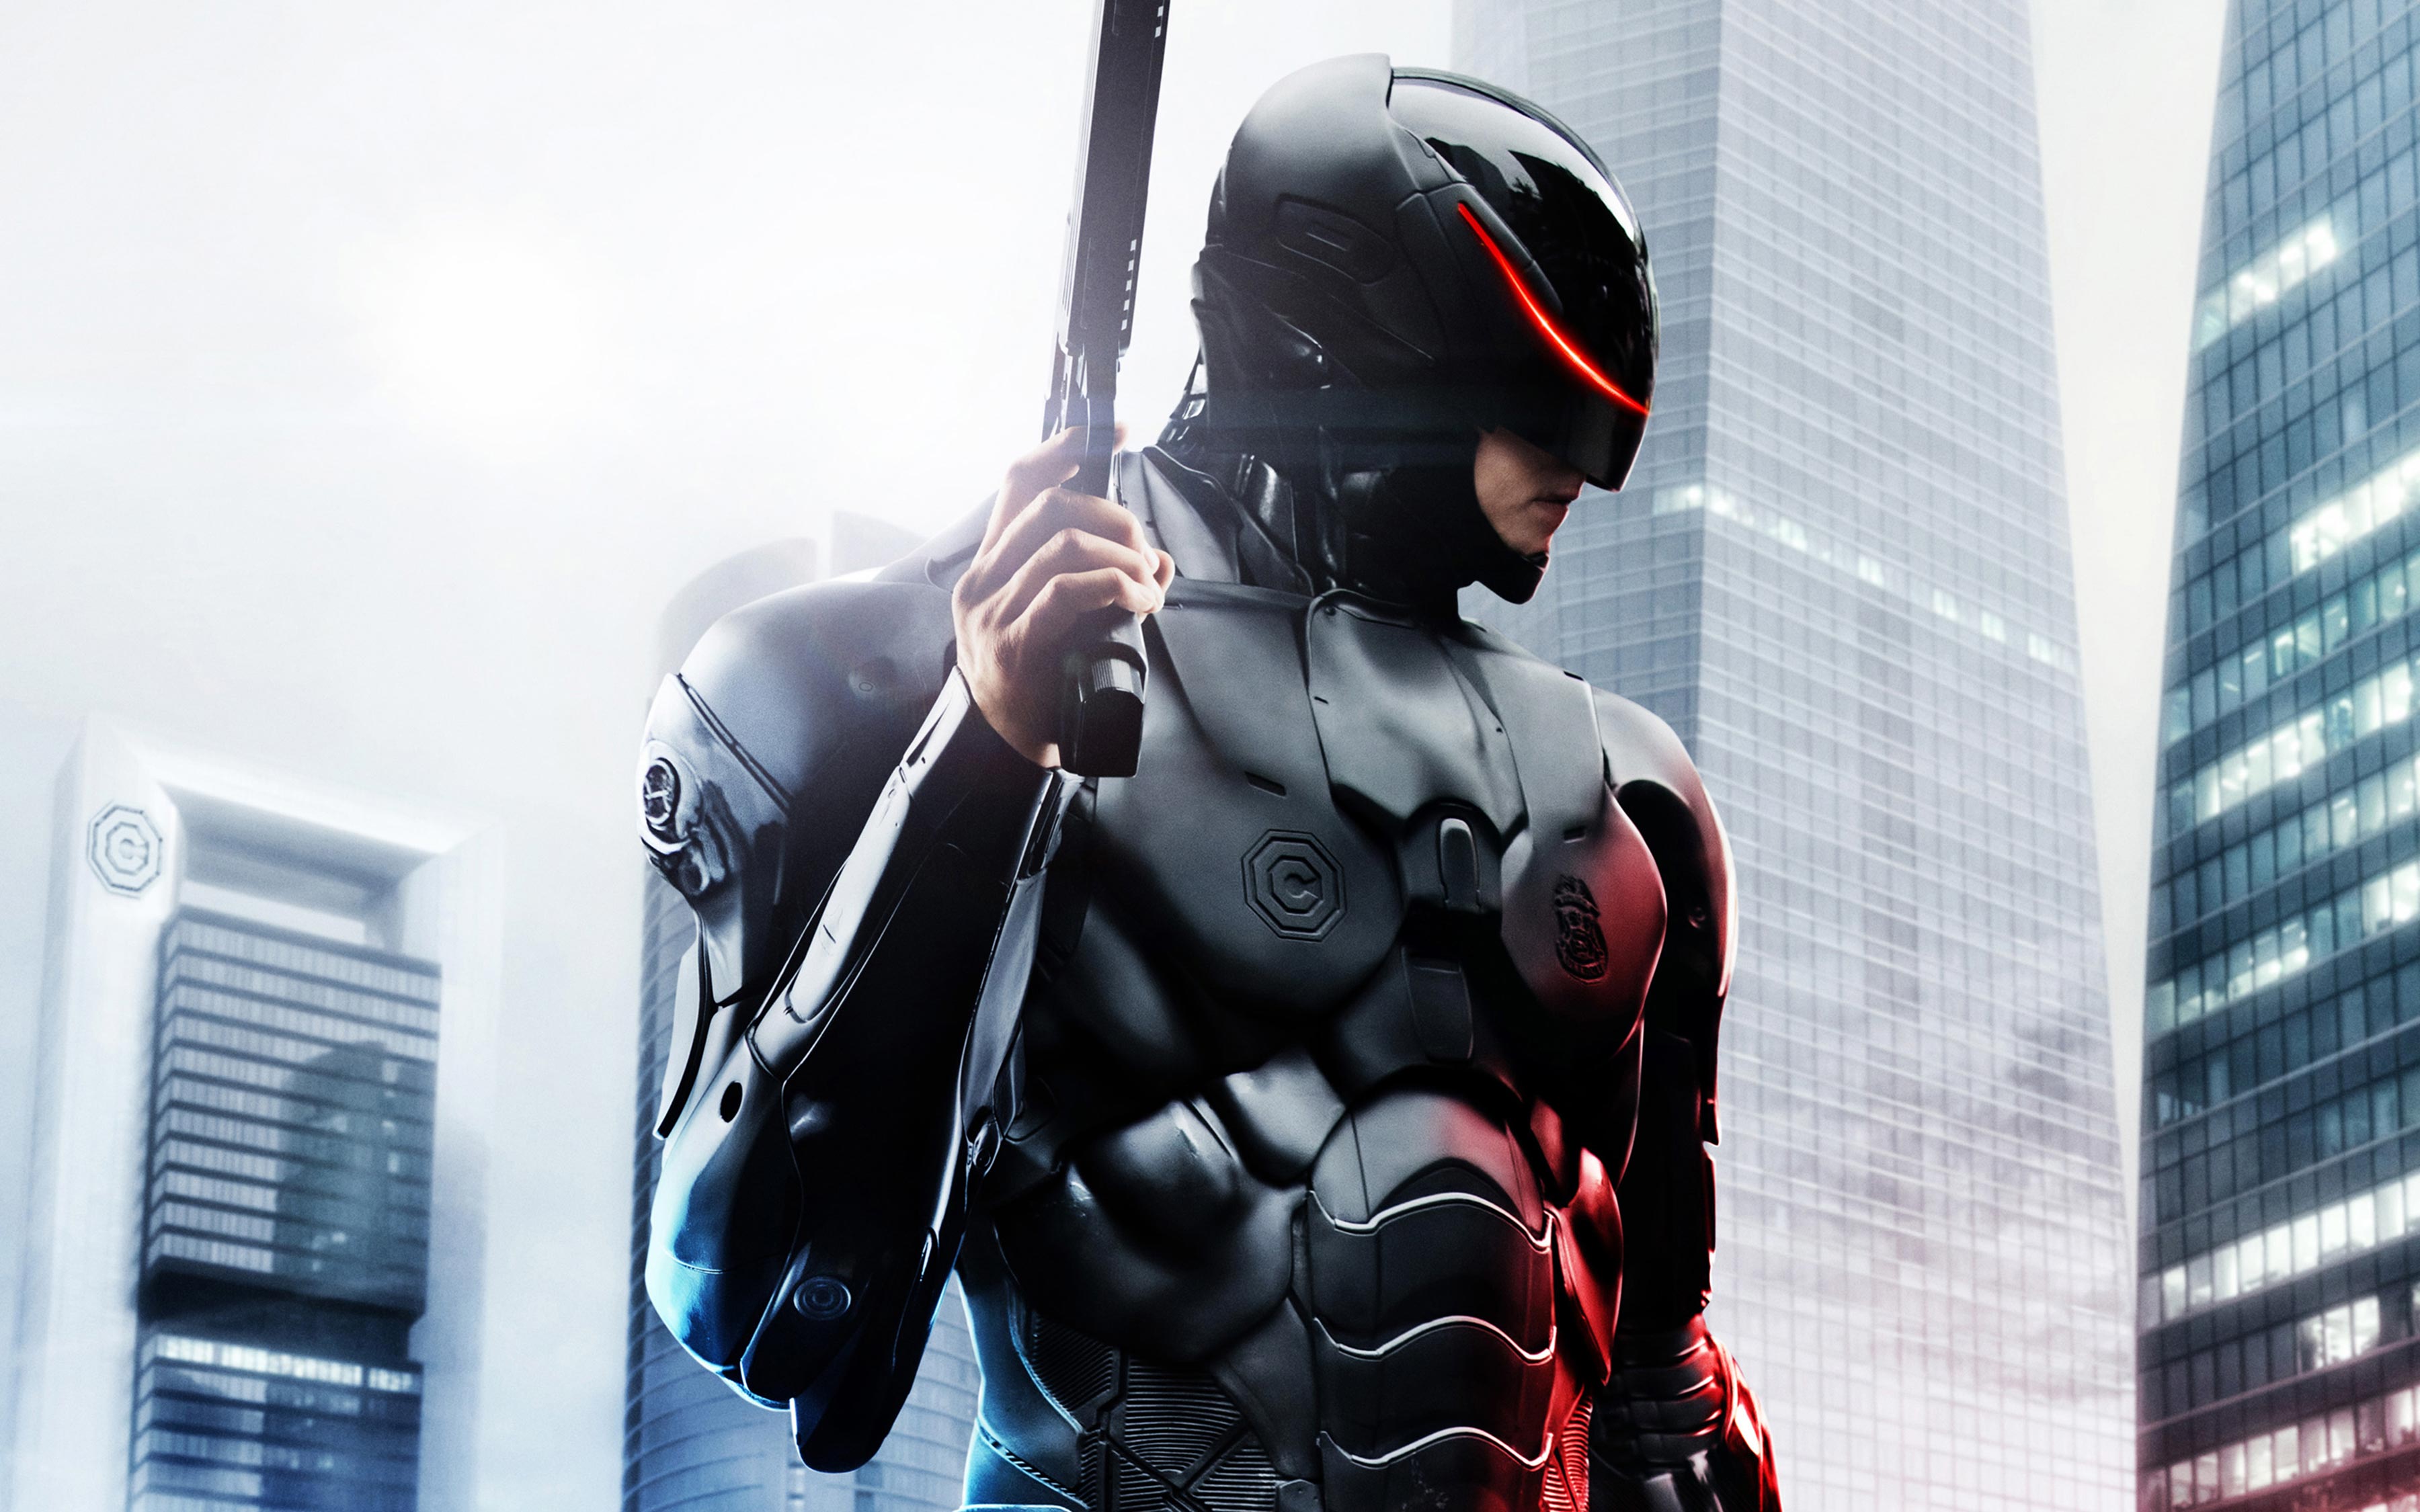 Robocop 2014 Movie Wallpapers [HD] Facebook Timeline Covers 3600x2250